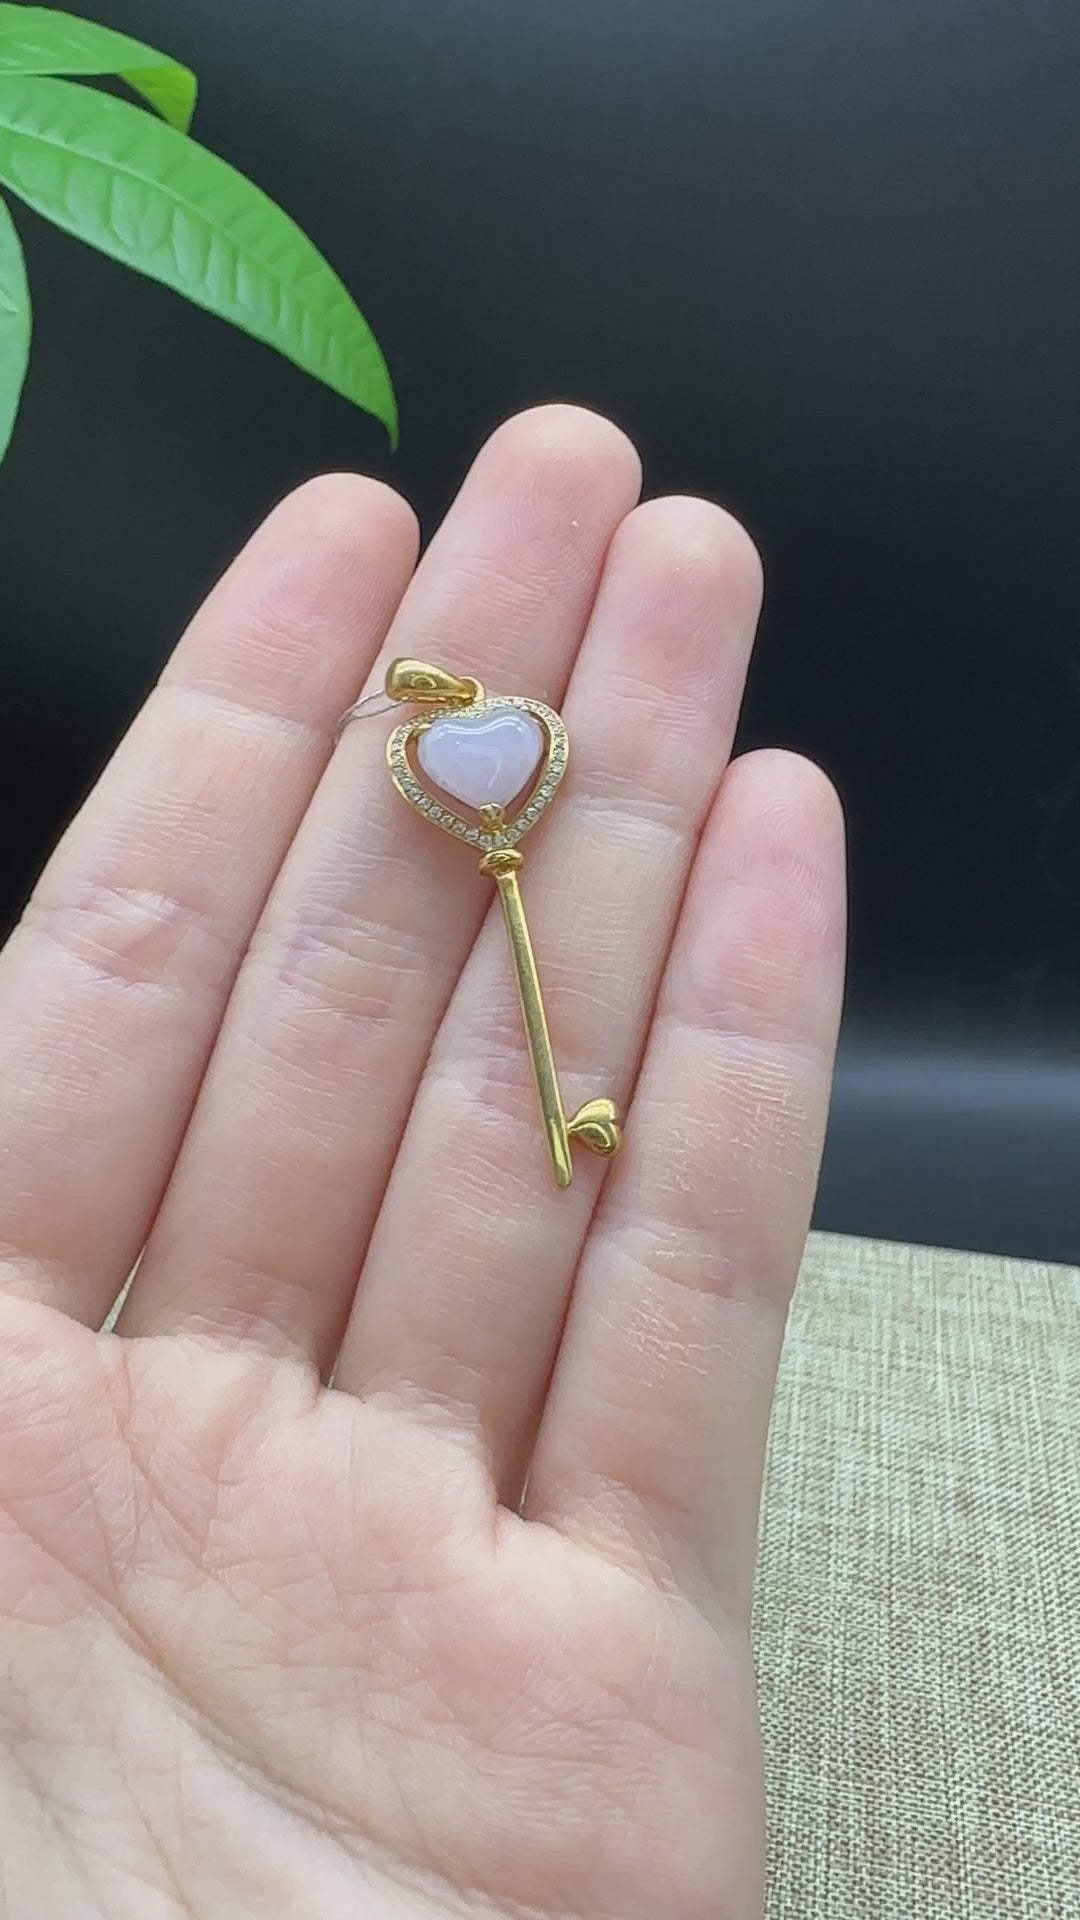 Heart of Gold Key Ring